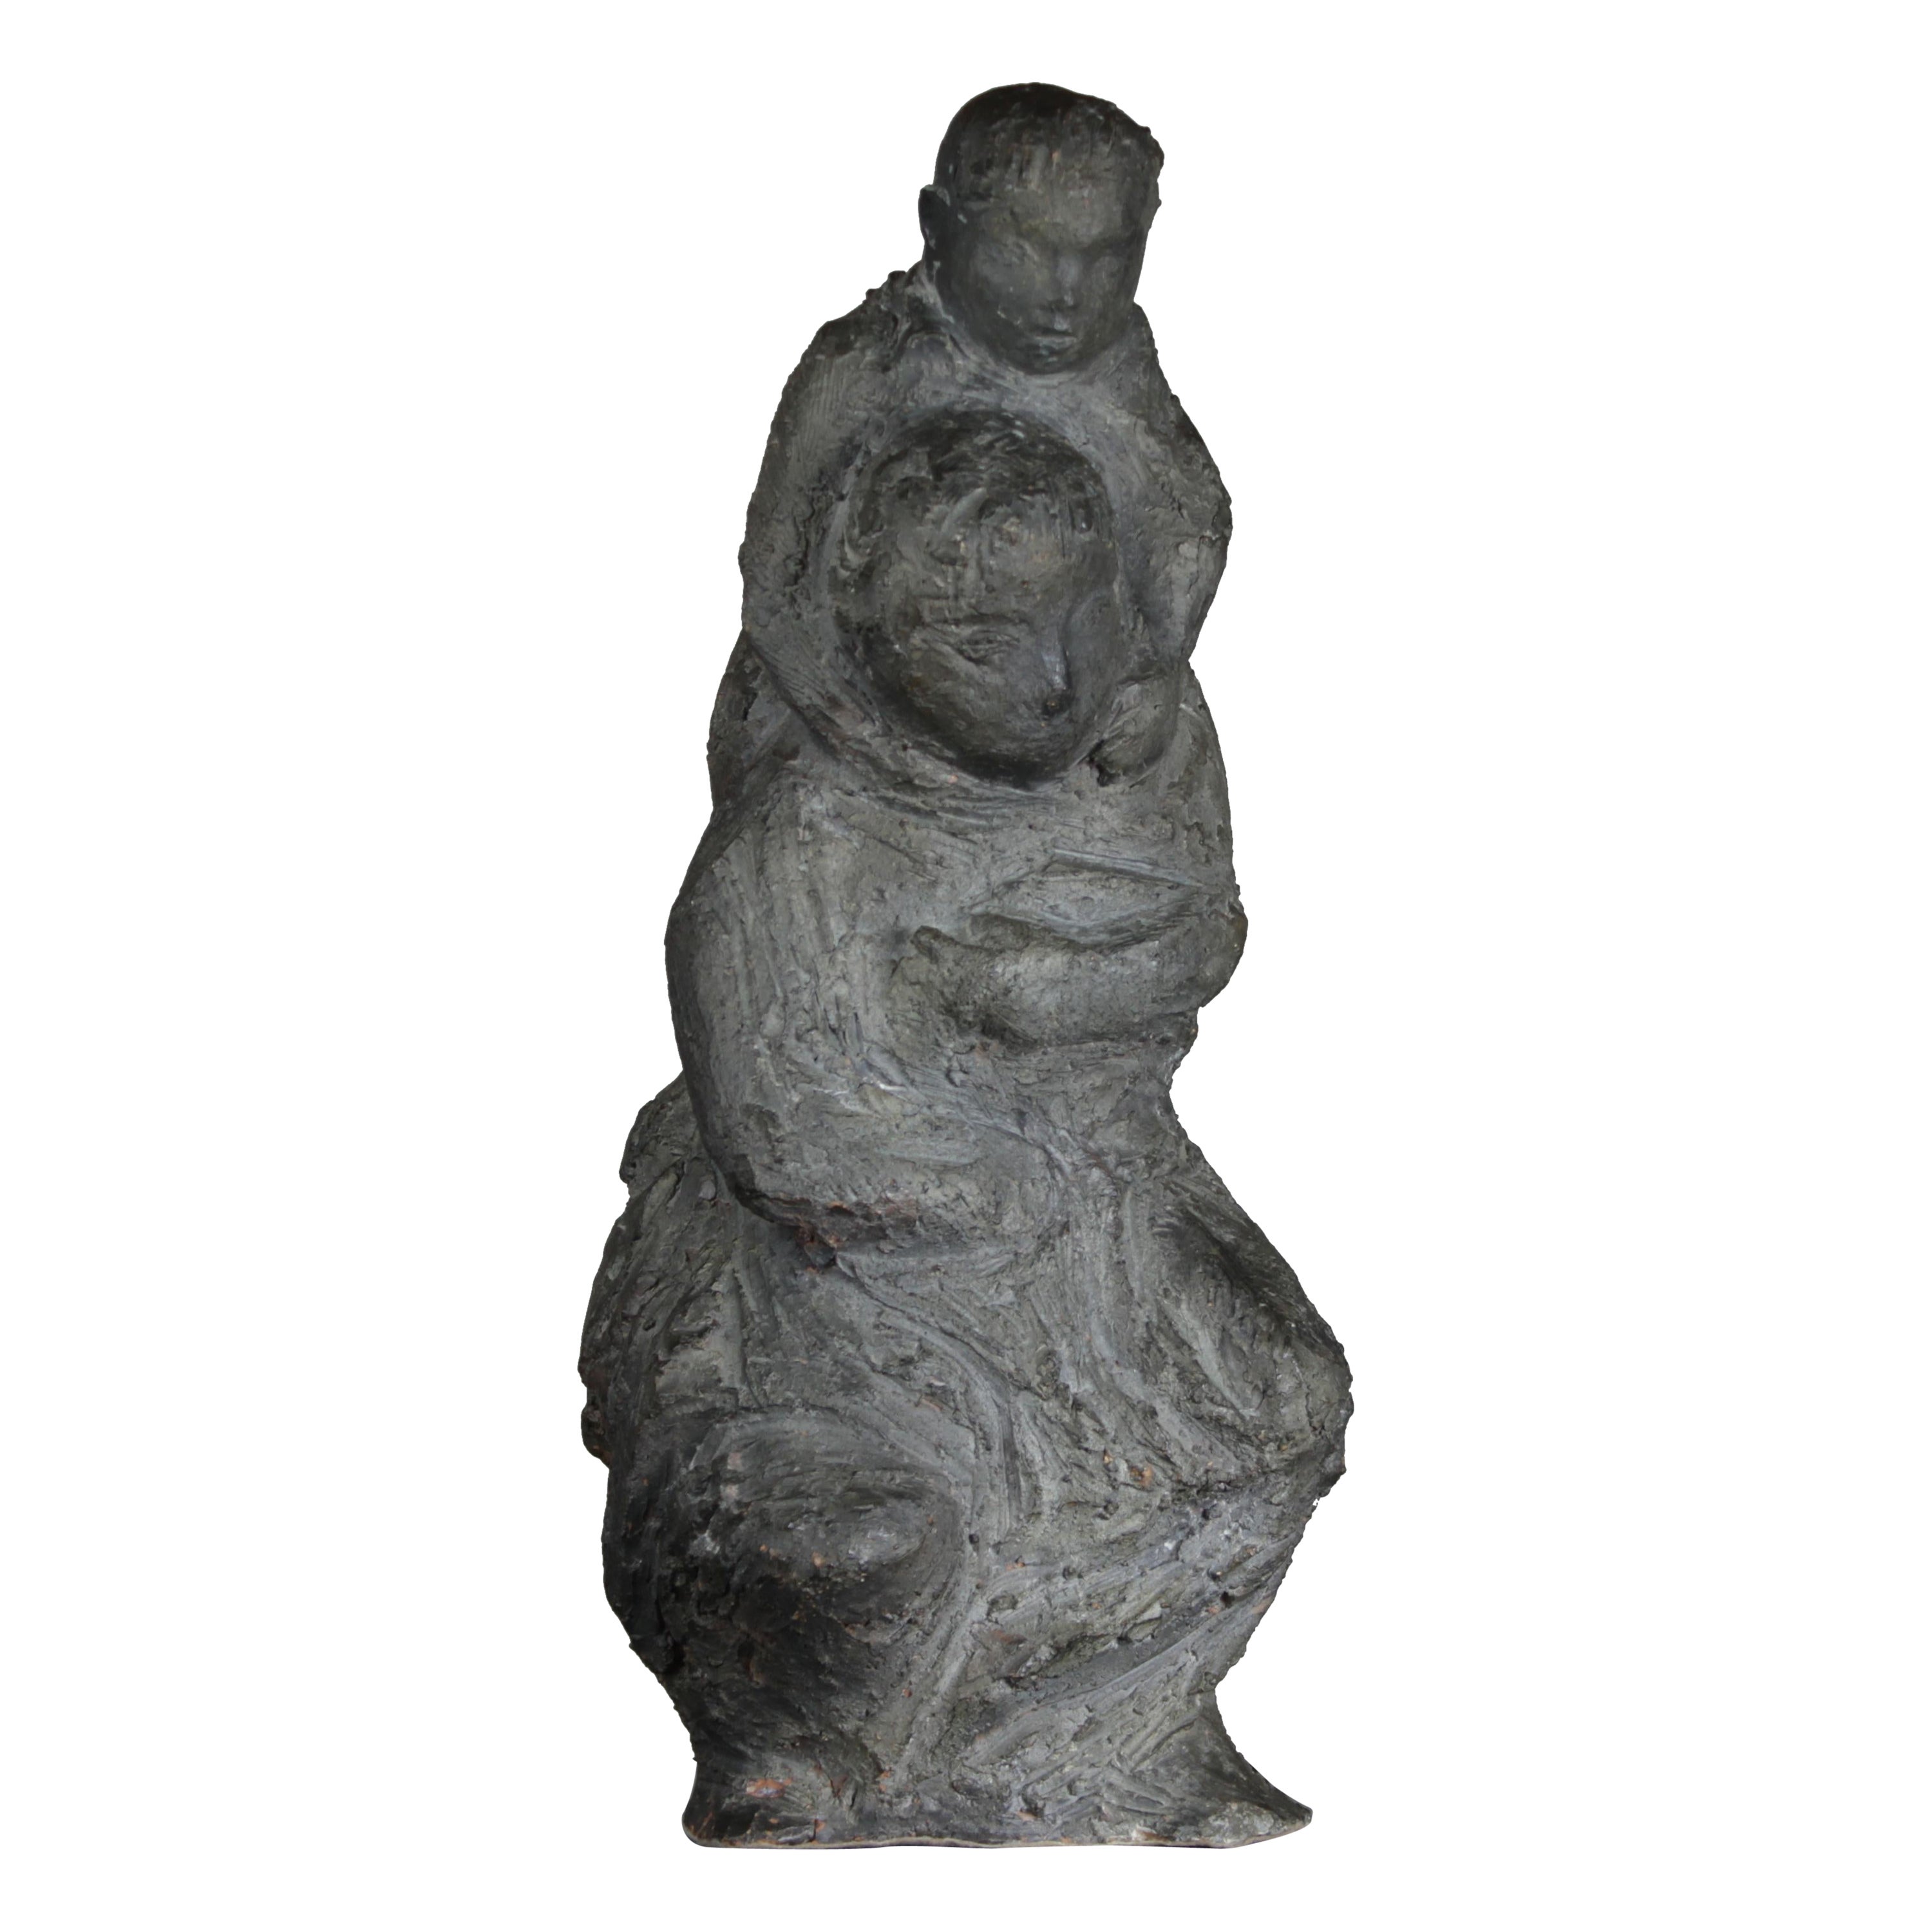 Modernist Stone Sculpture, 'Mother and Child' by Willy Van Der Putt (1925-1997) For Sale